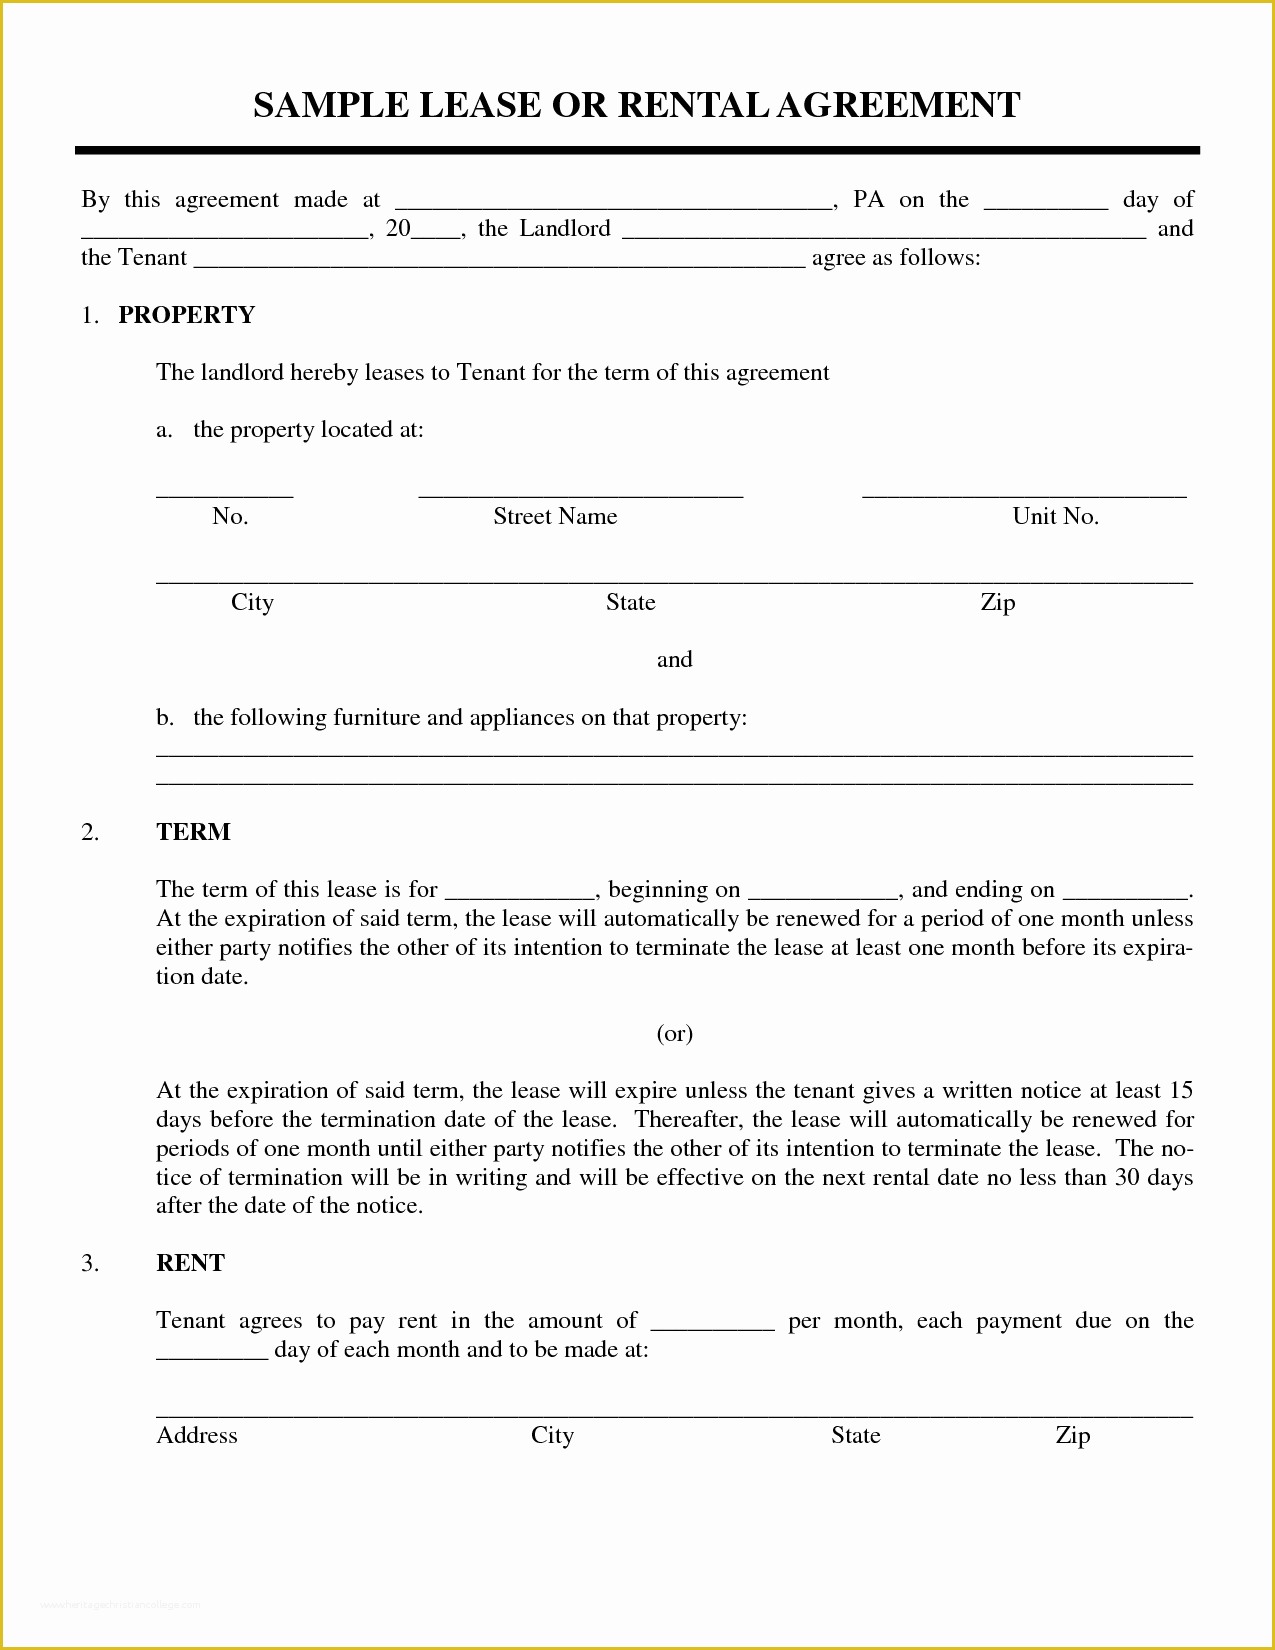 Free Apartment Lease Agreement Template Of Sample Lease or Rental Agreement